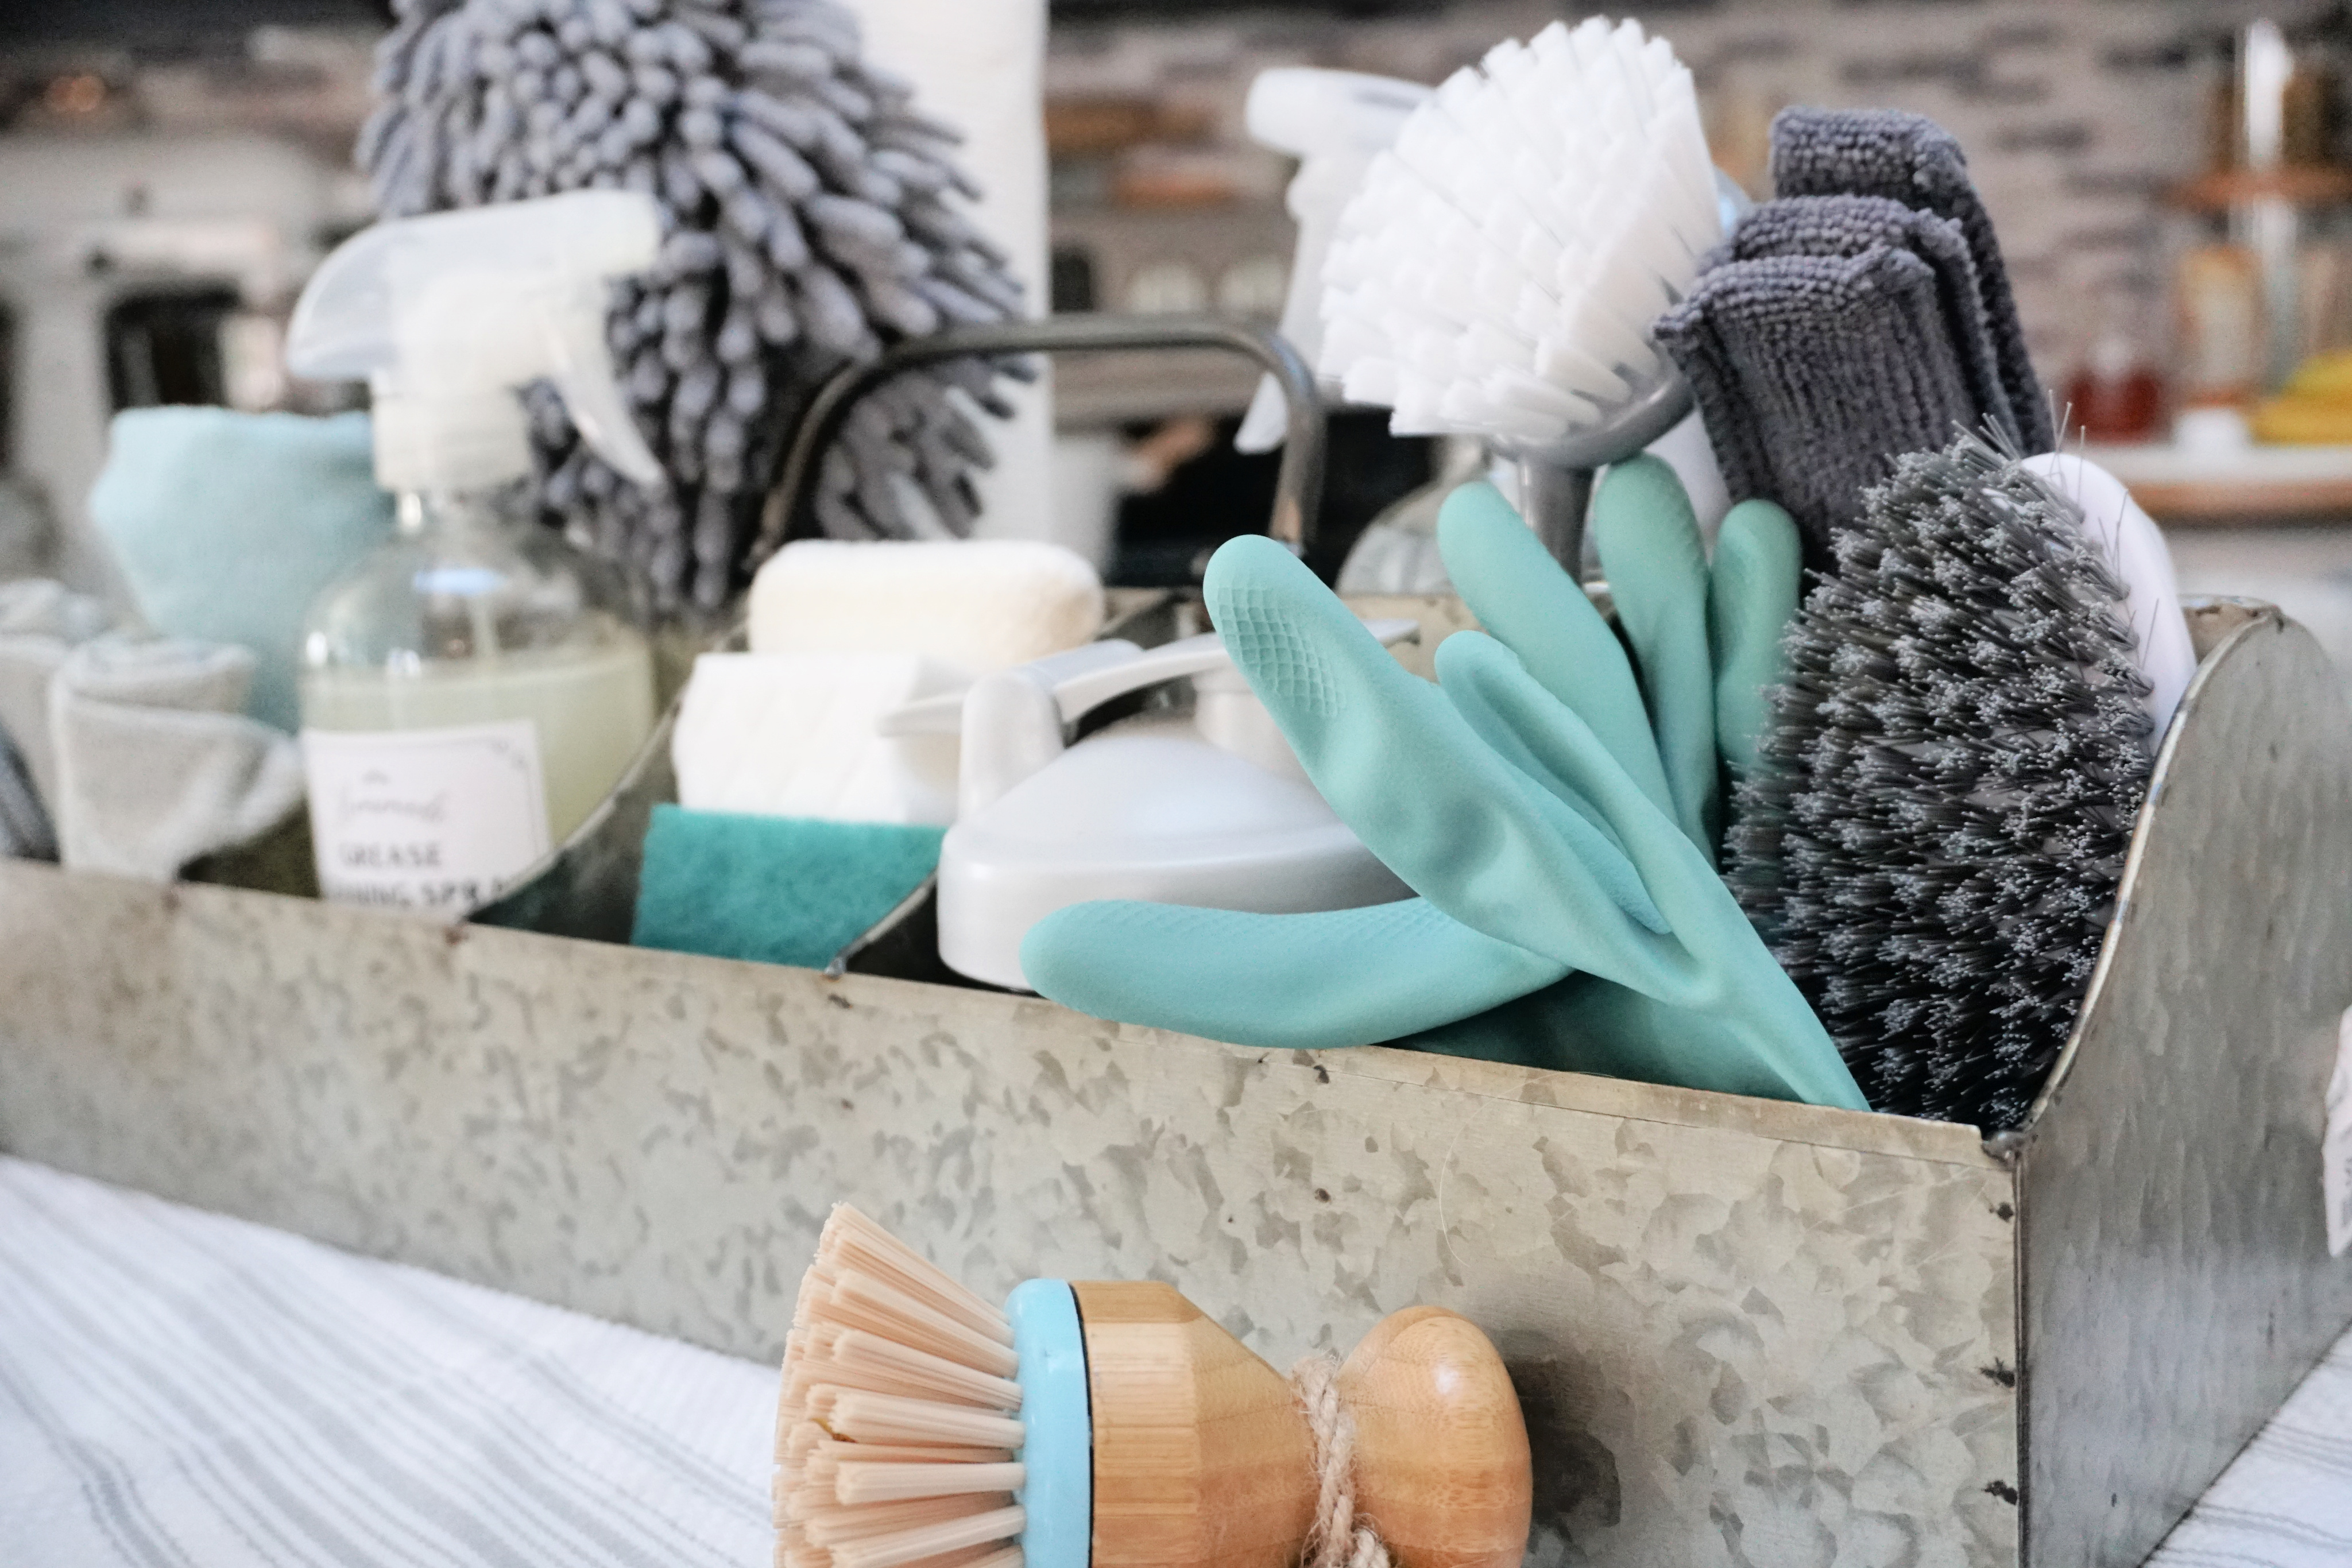 Beginners Guide To The World of Housekeeping: Cleaning Supplies